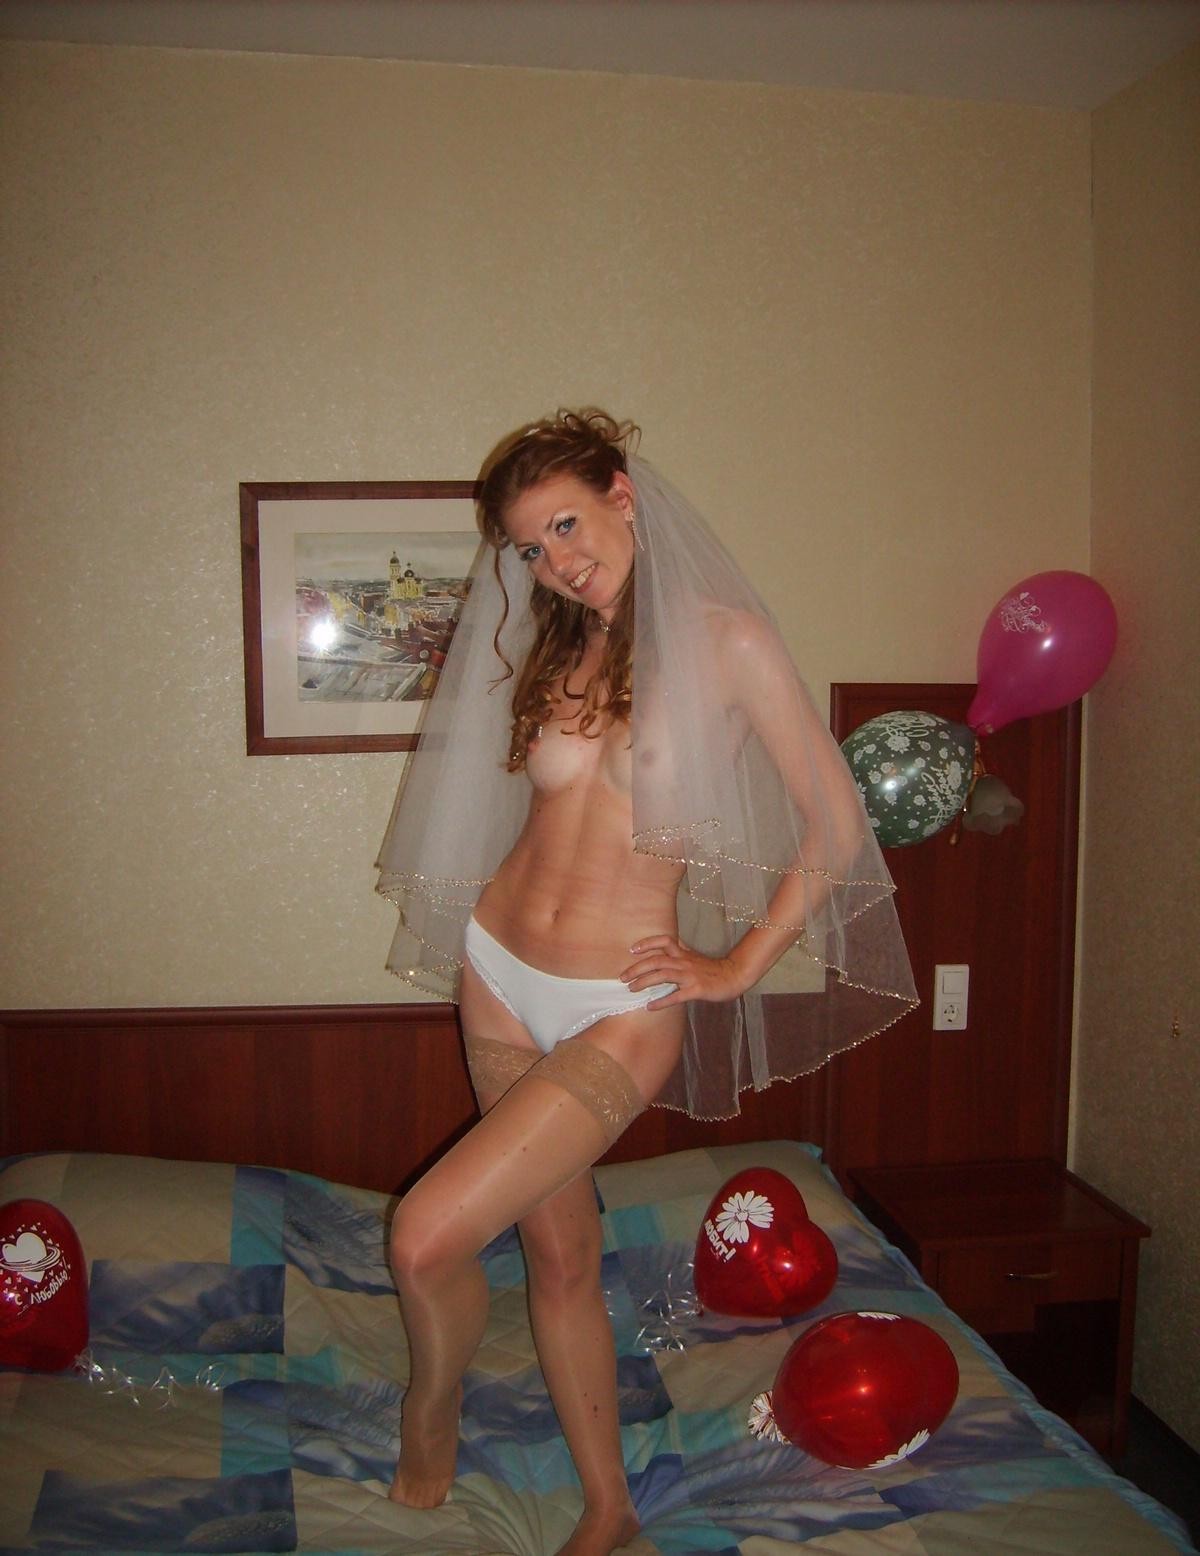 Few unaware upskirts and few different bride photos Archives